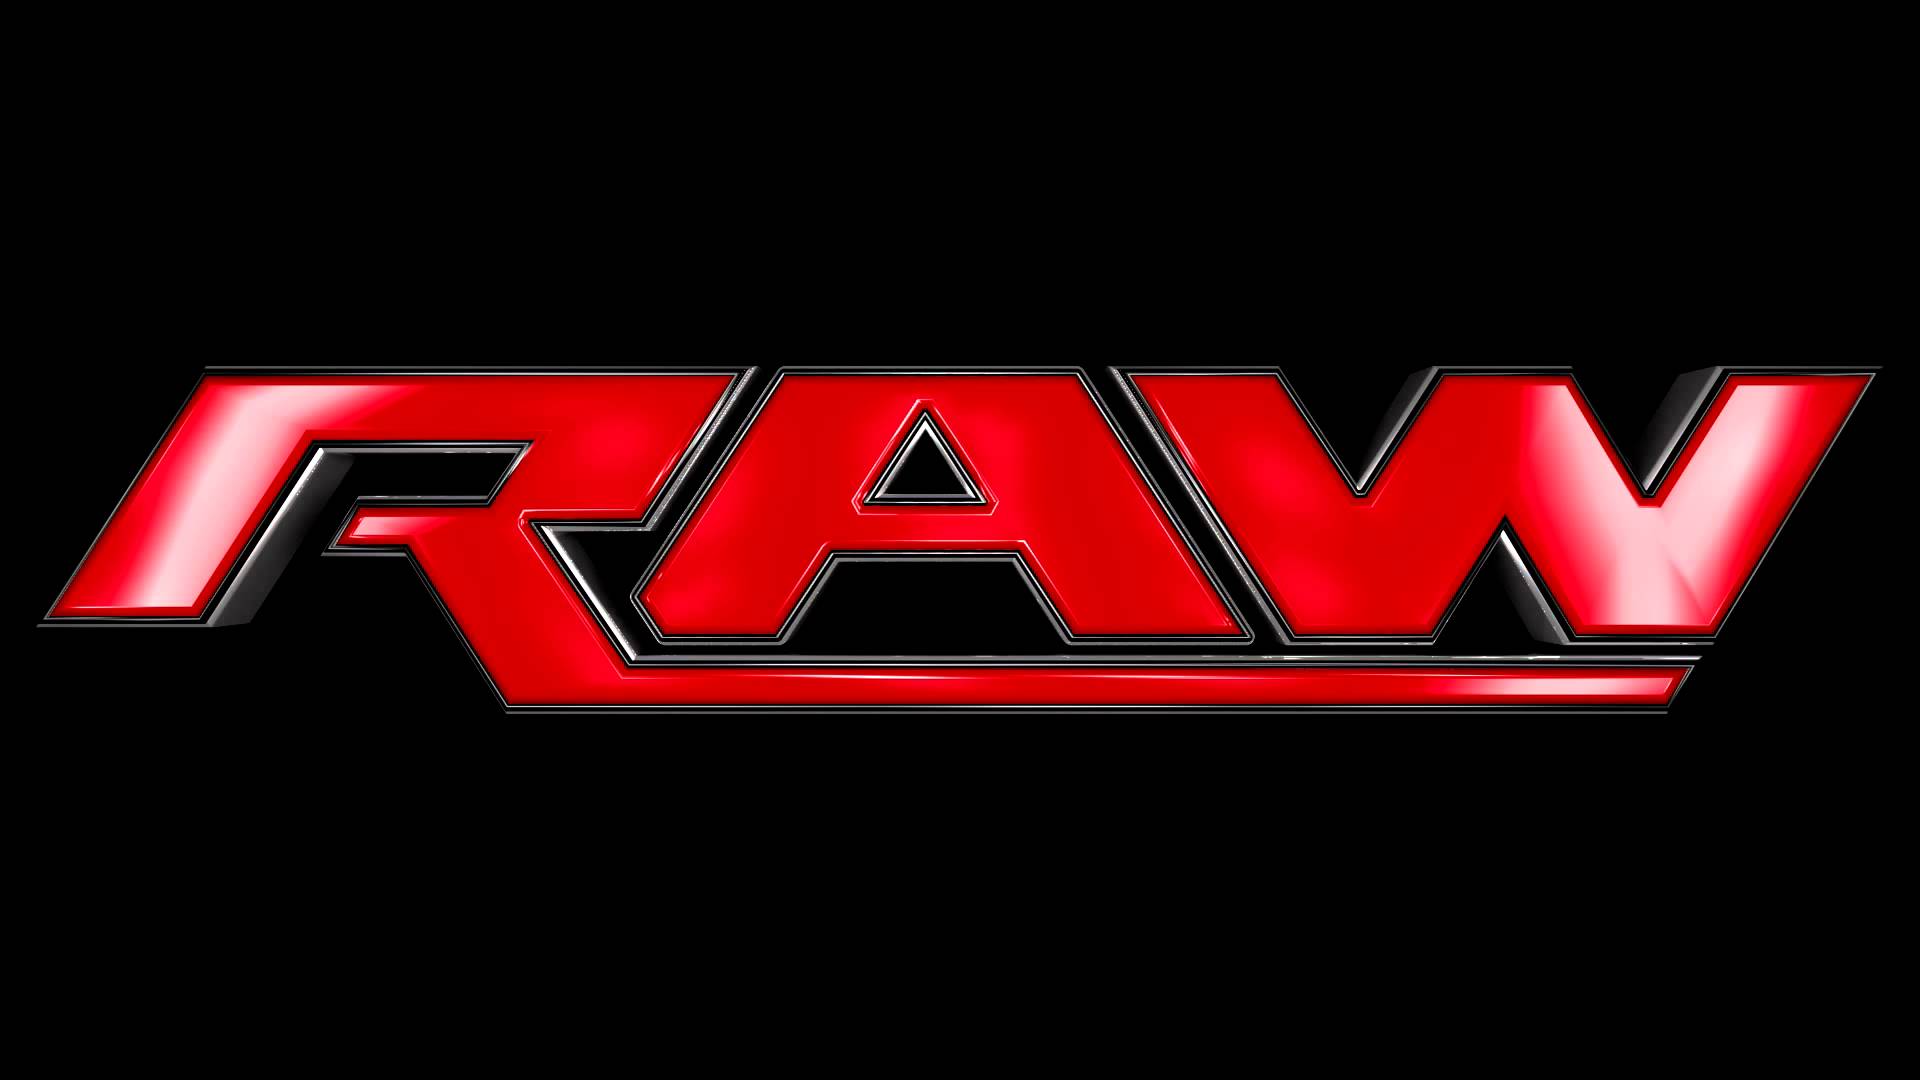 Free Download Wwe Raw Wallpapers Hd Wallpapers Backgrounds Of Your Choice 19x1080 For Your Desktop Mobile Tablet Explore 78 Raw Wallpaper Wwe Background Wallpaper Gugu Mbatha Raw Wallpaper Smackdown